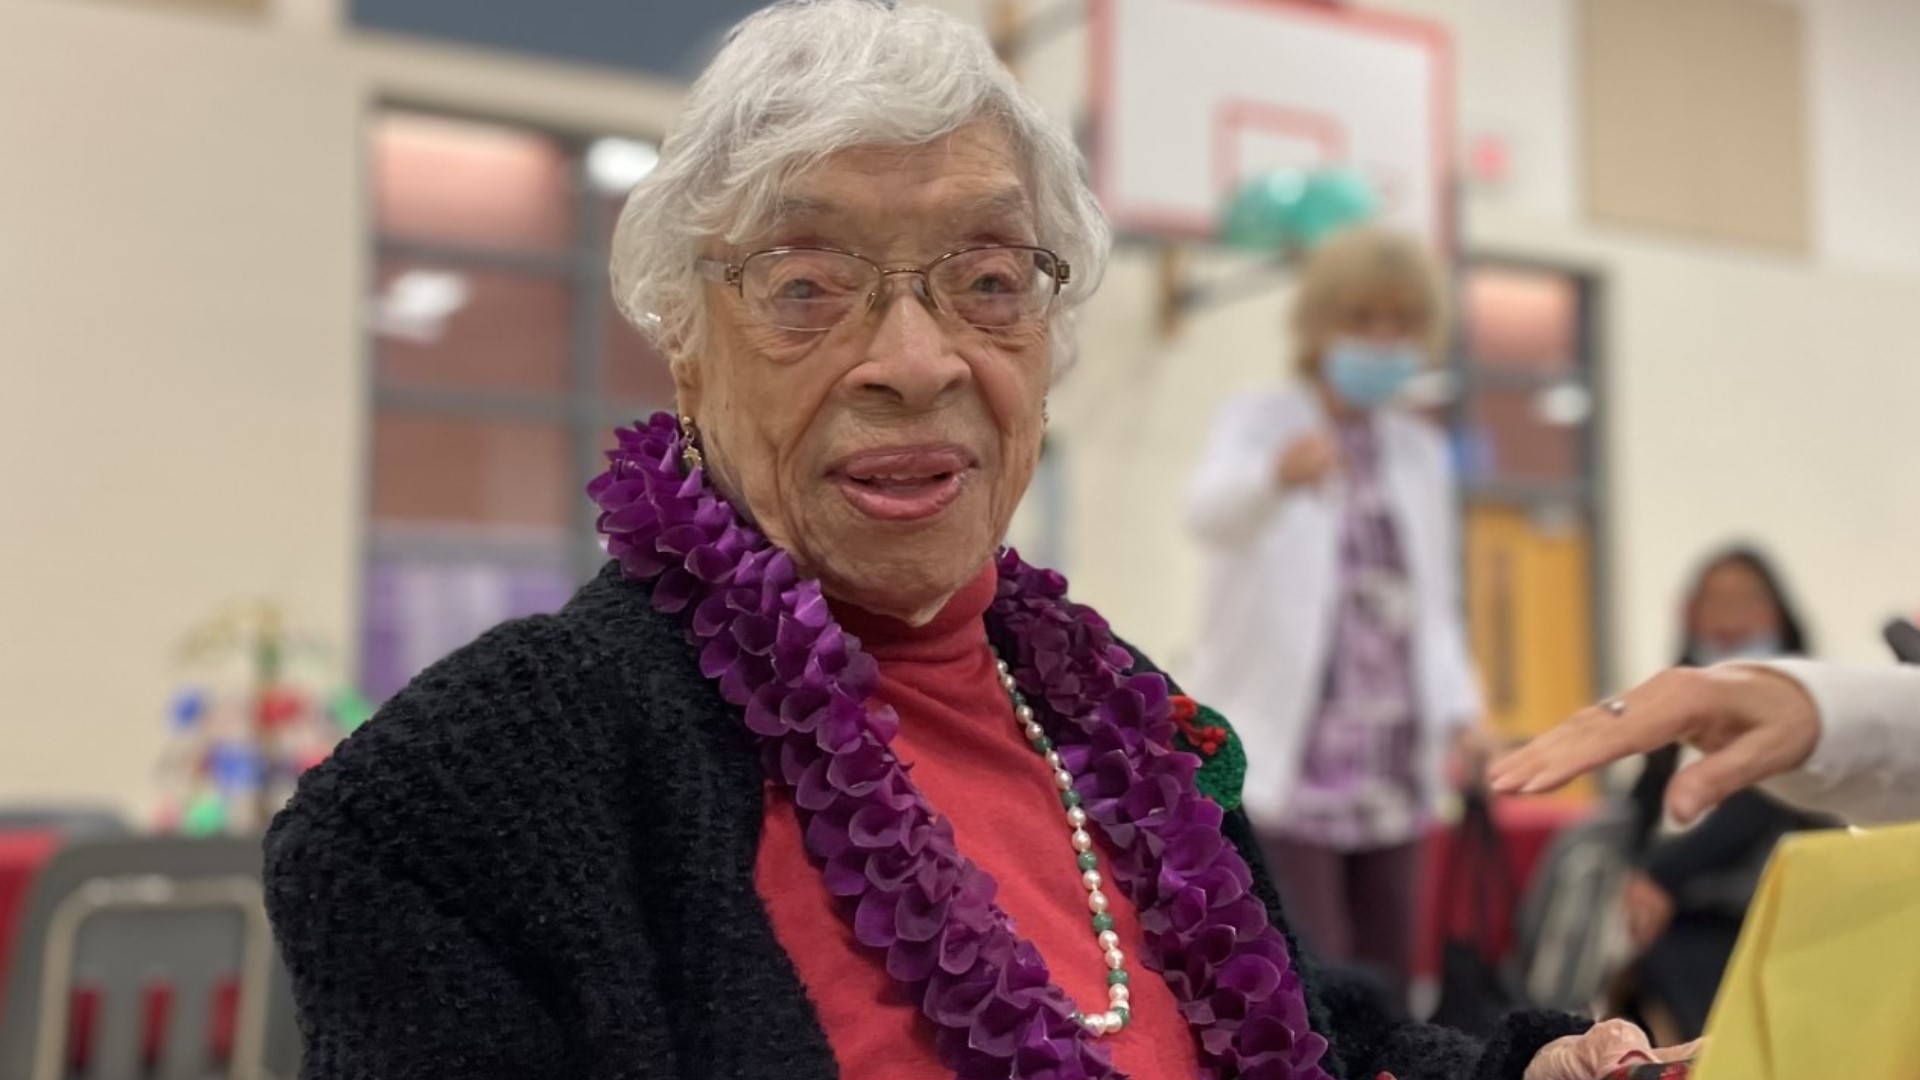 Alma Gravely celebrated her 100th birthday on Saturday surrounded by her loved ones. She tells WUSA9 she is looking forward to being a centenarian.